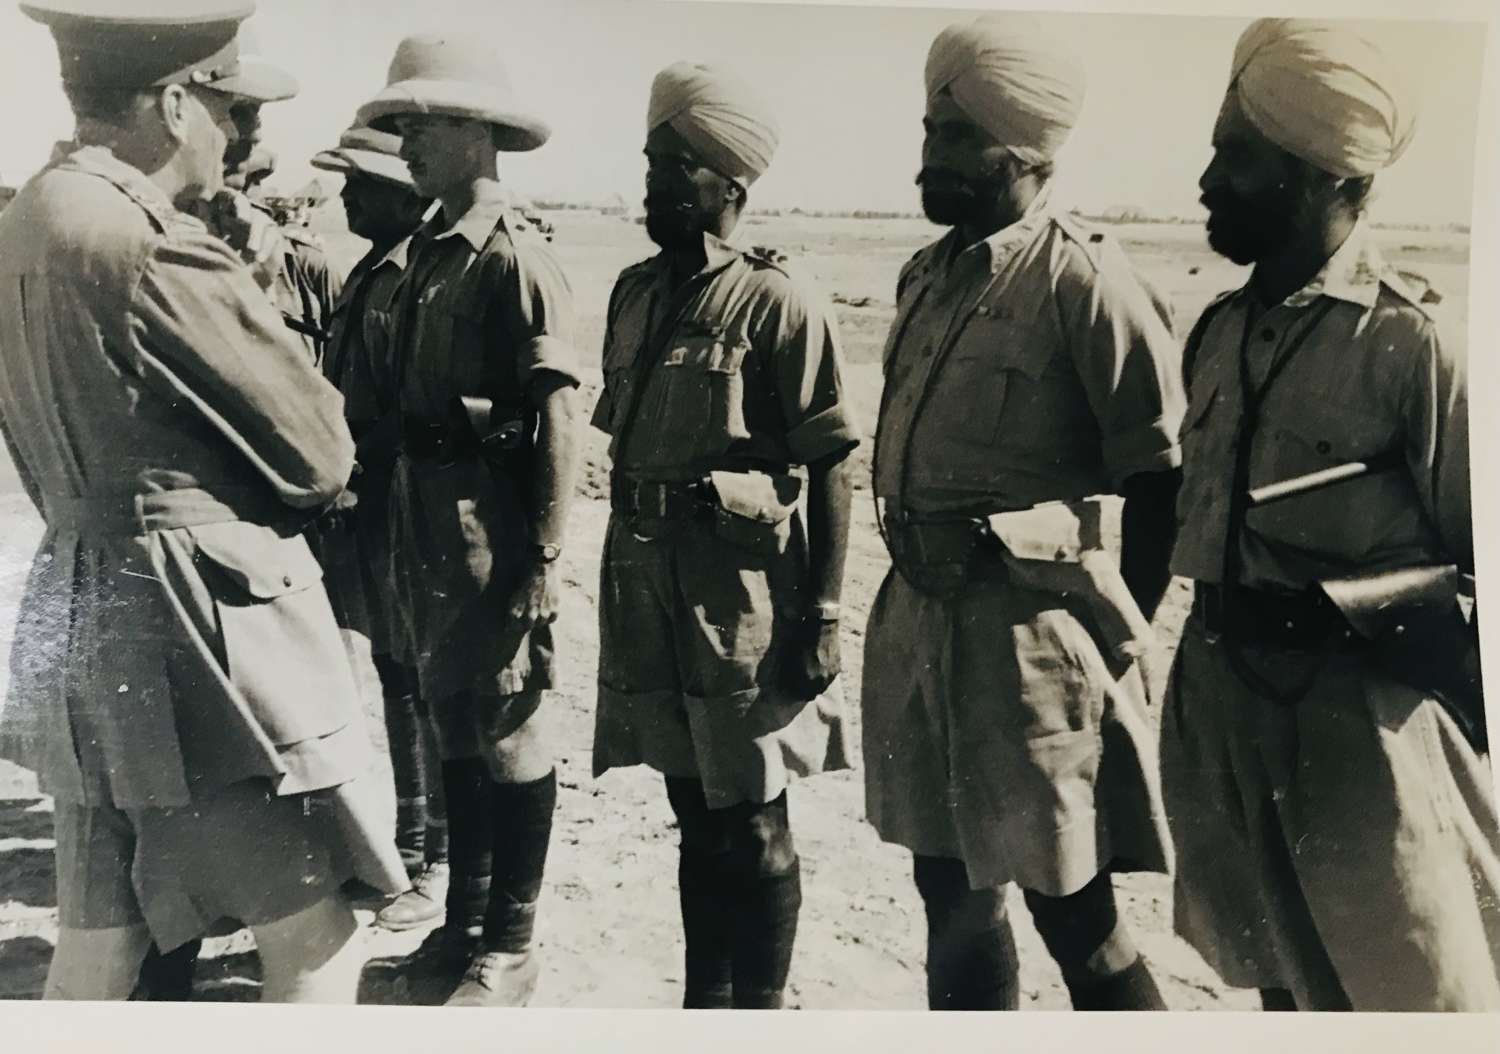 Press Photo of Auchinleck with officers of the Indian army